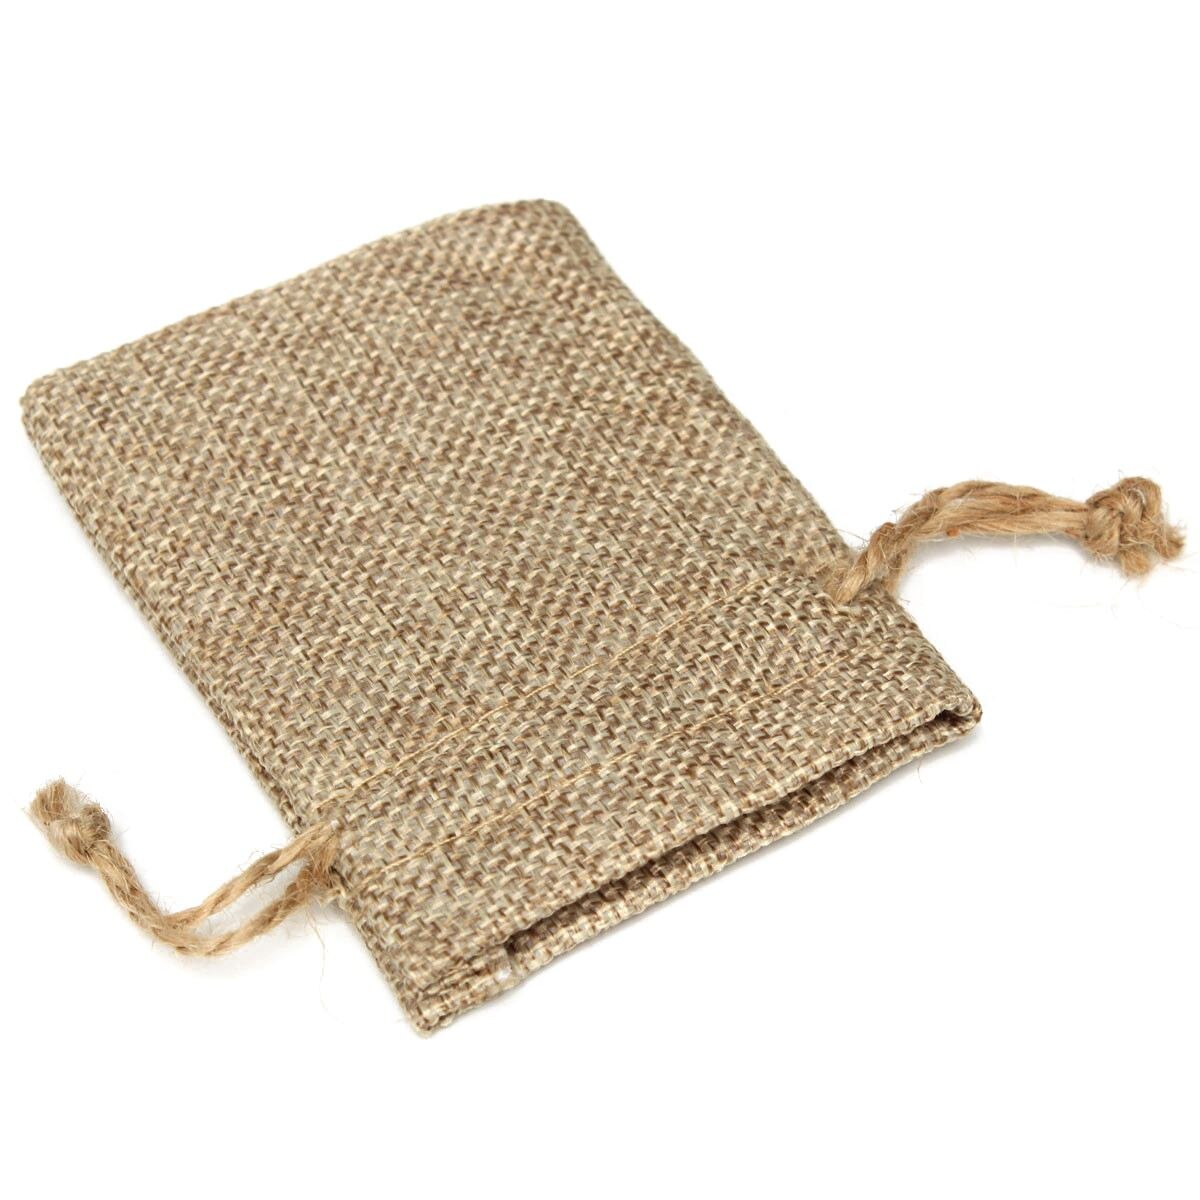 20PCS Linen Jewellery Drawstring Pouch Ring Beads Mini Candy Bags Burlap Gift - ebowsos